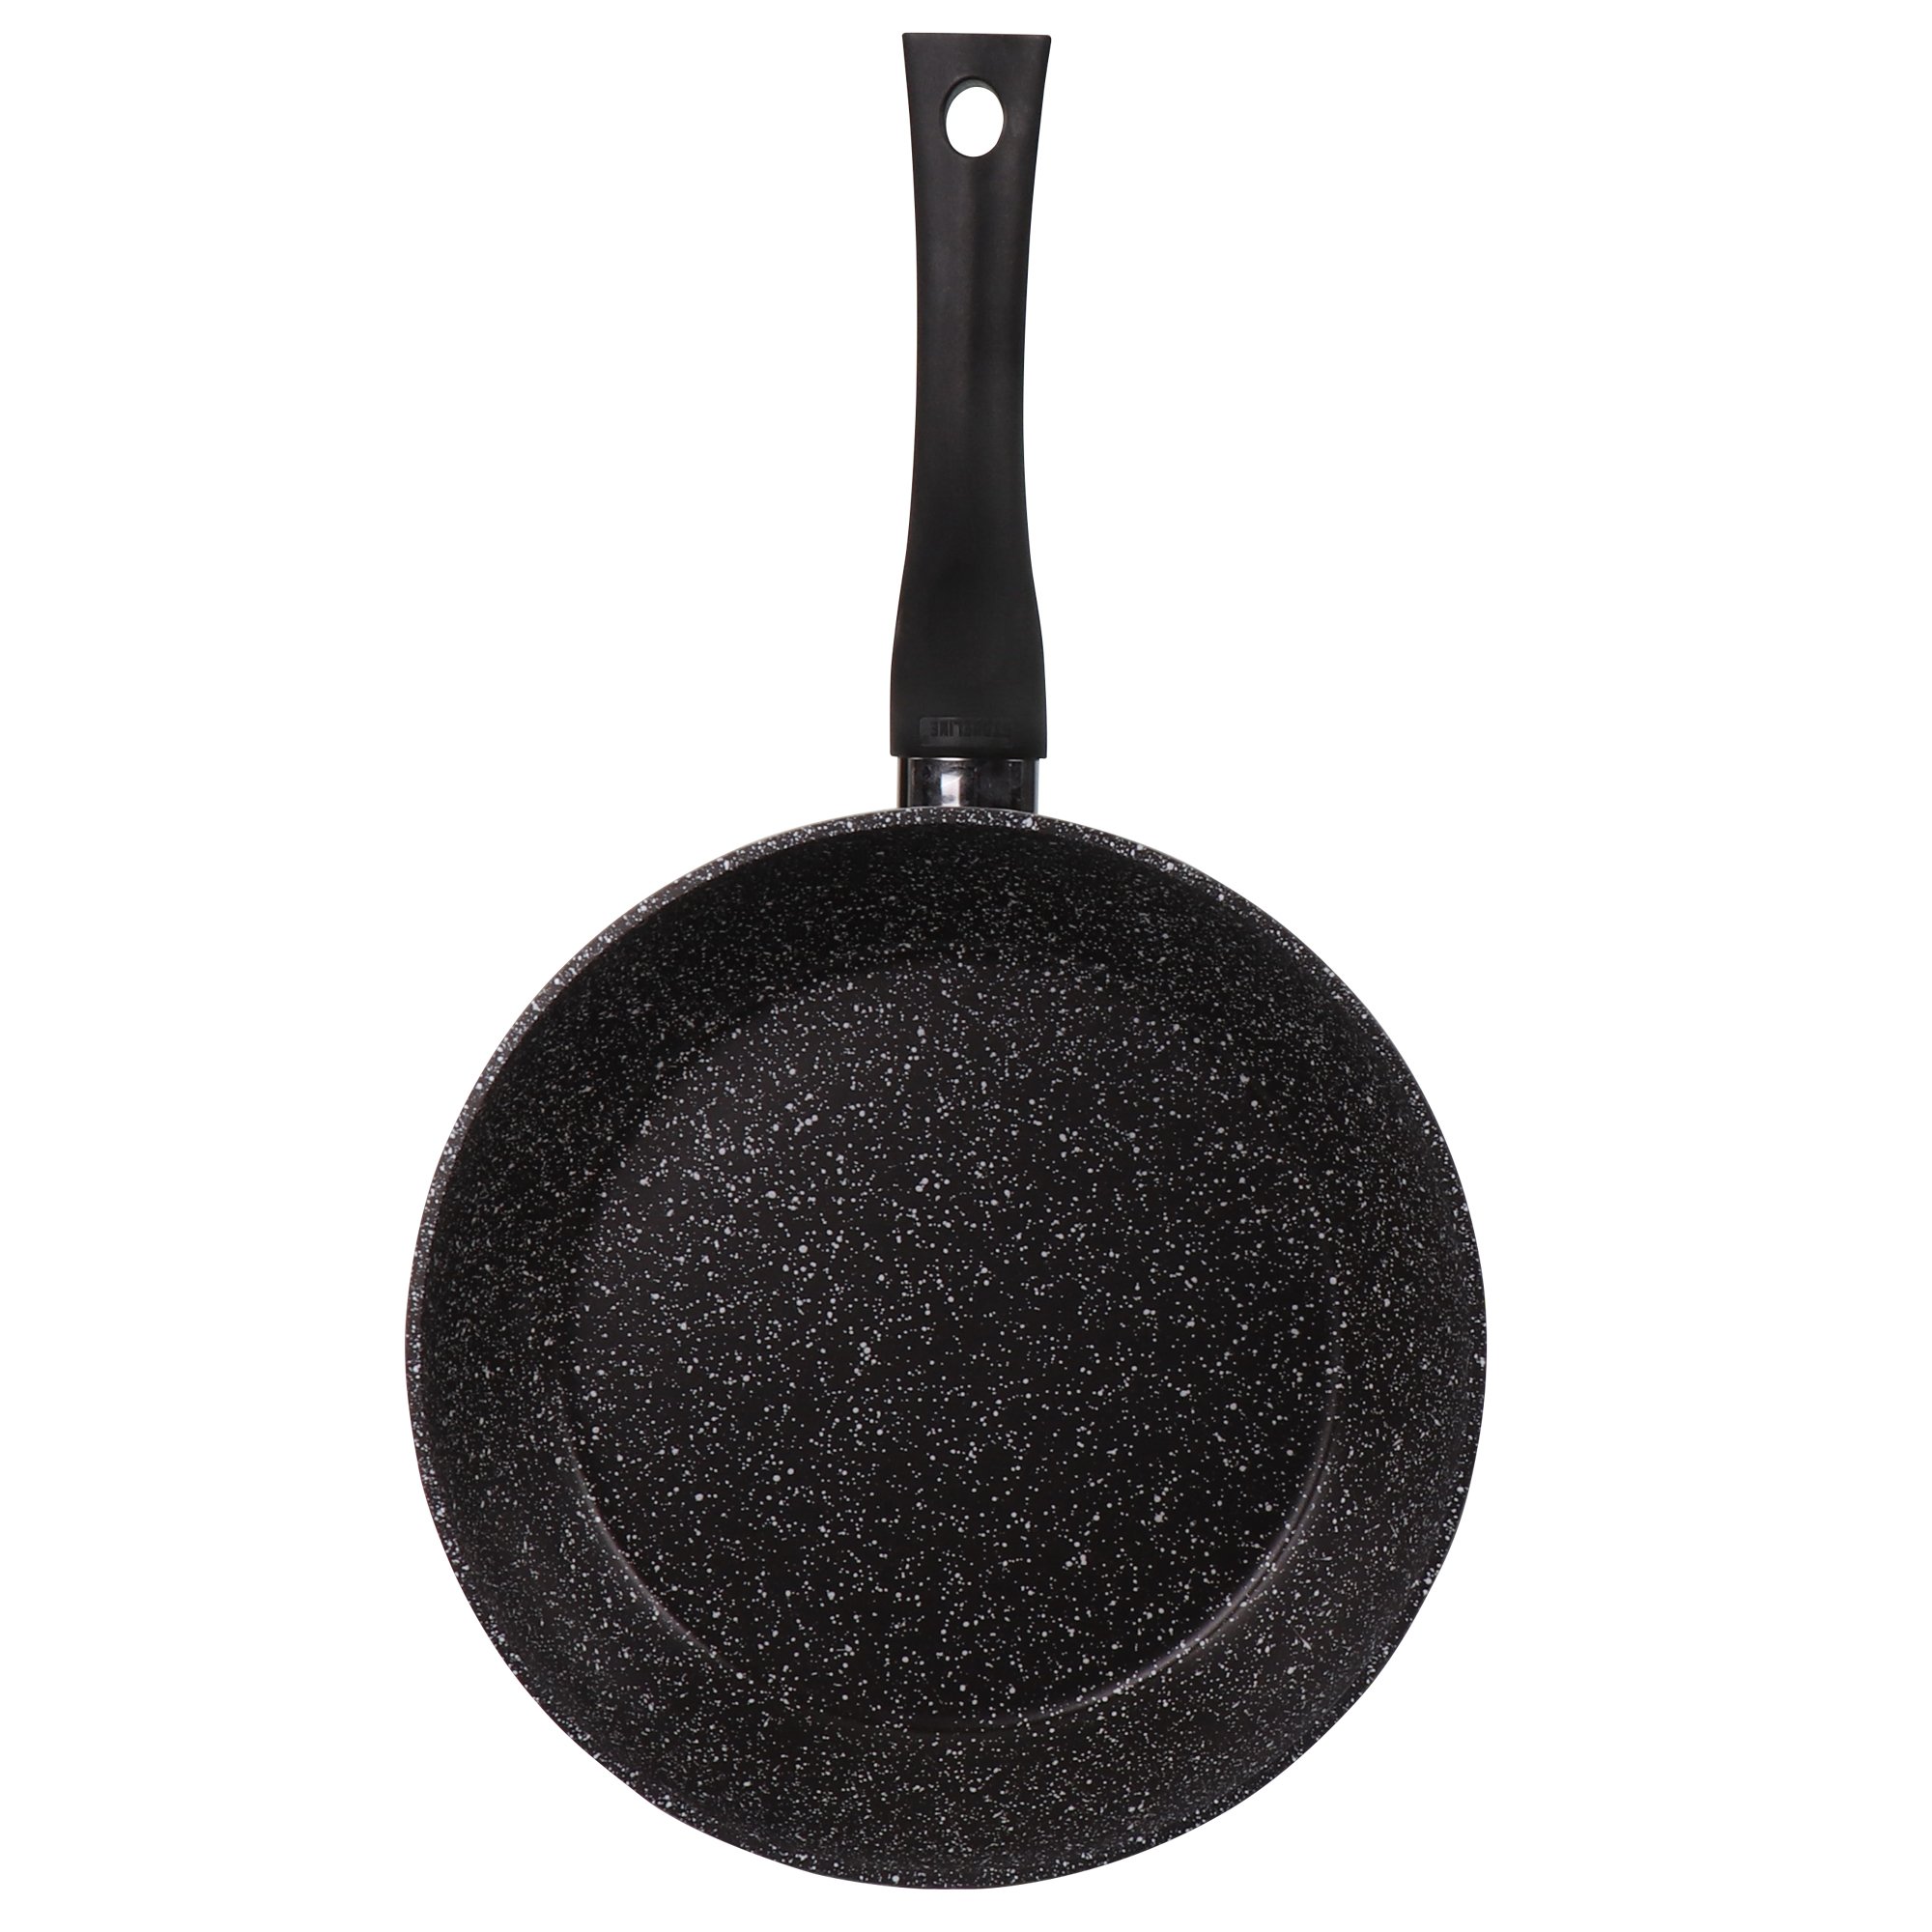 STONELINE® Primo frying pan 24 cm, non-stick coated pan, induction and oven-safe